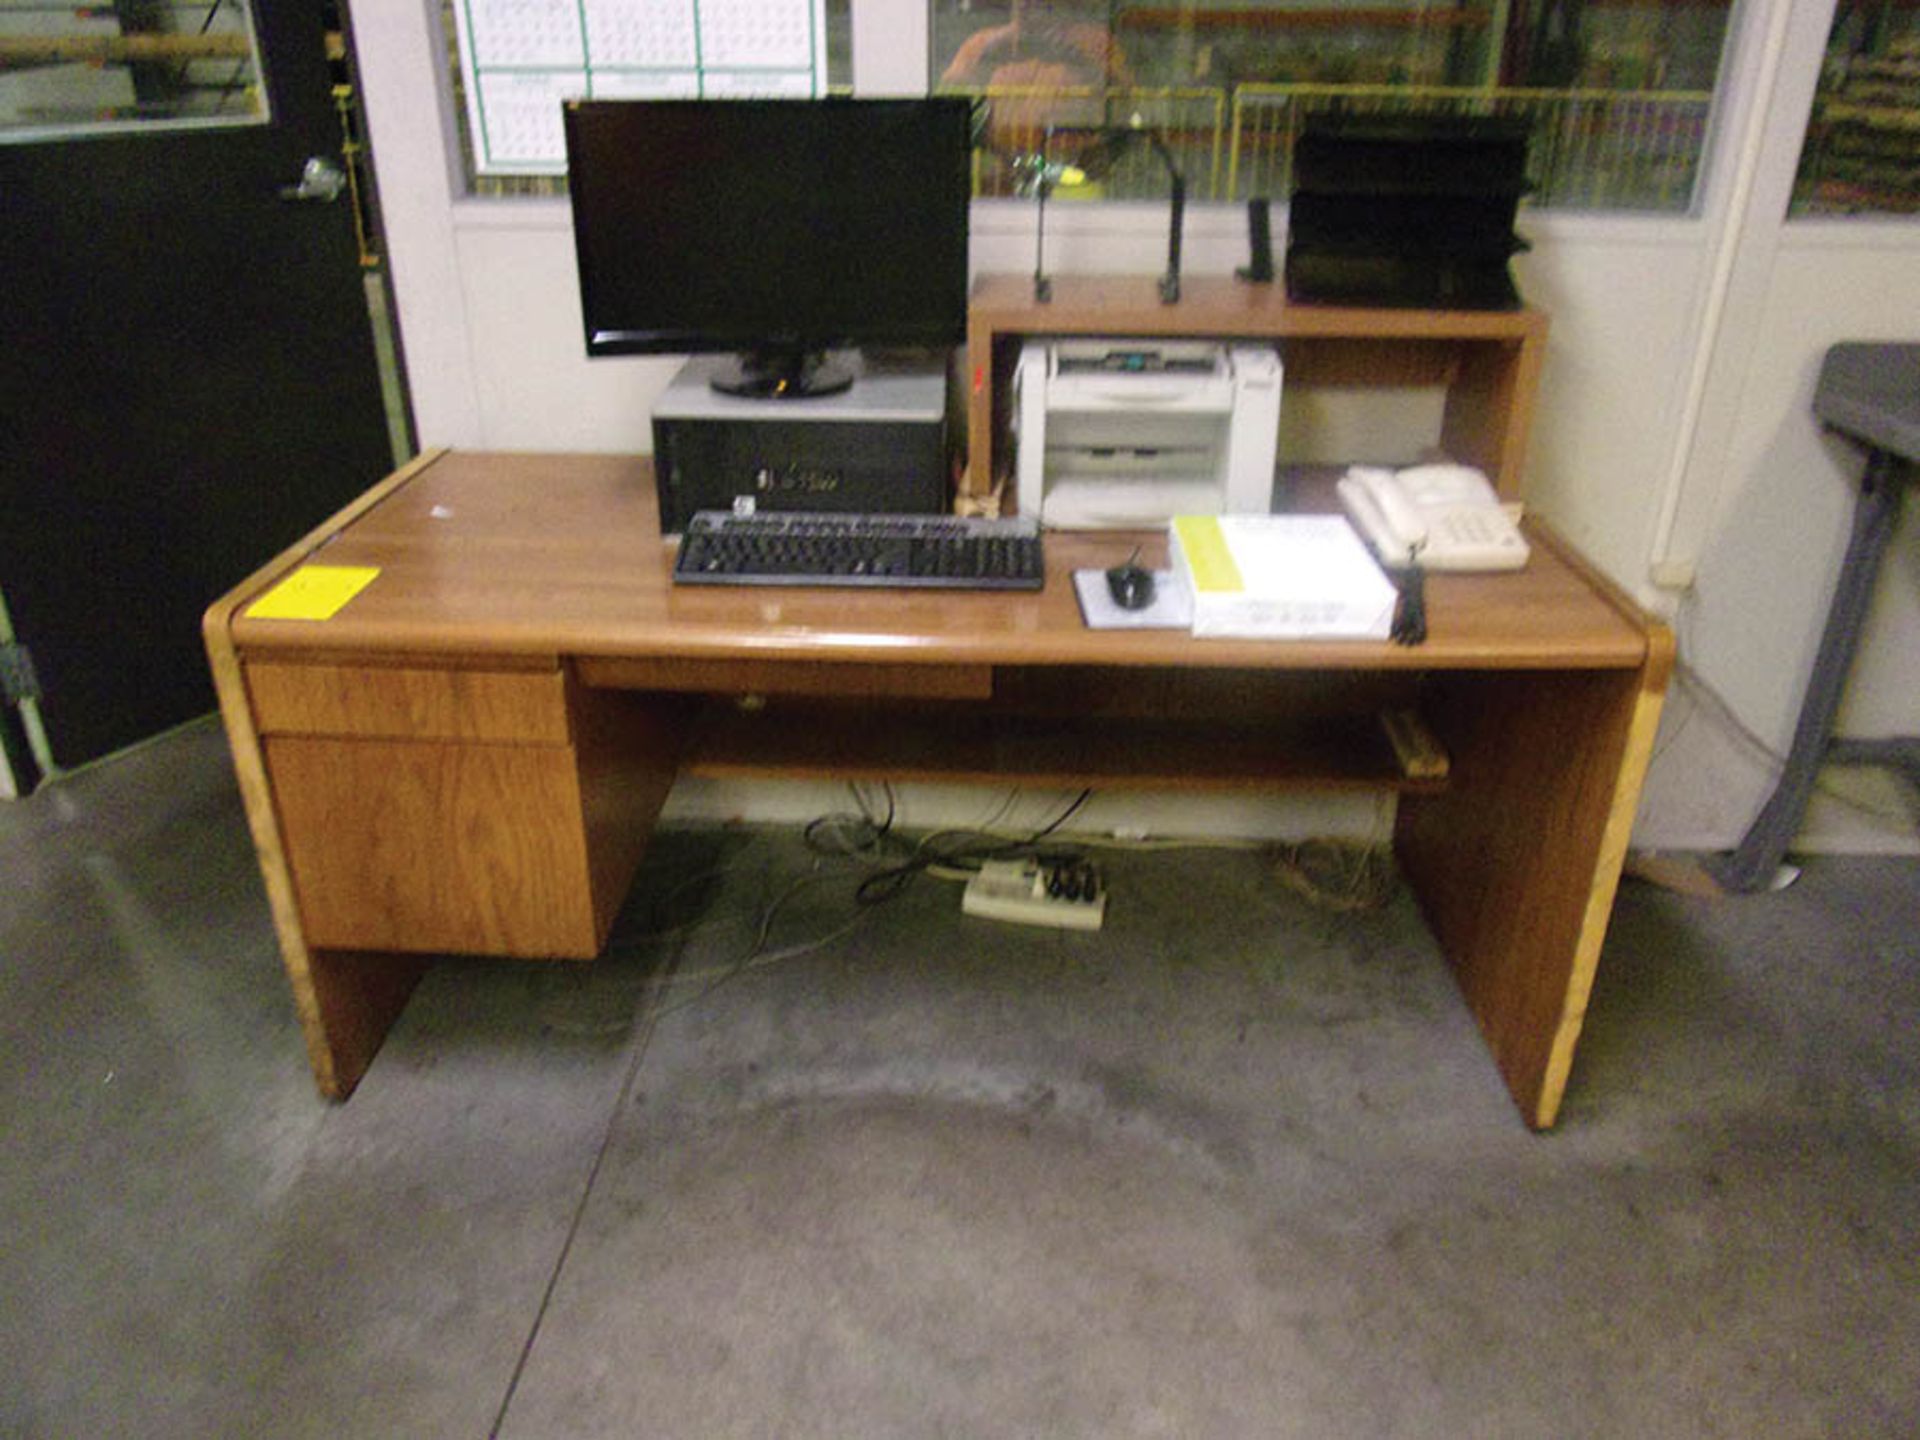 (4) DESKS, CHAIRS, (2) PC'S, (1) PANASONIC COPIER, LATERAL FILE CABINET - Image 3 of 3